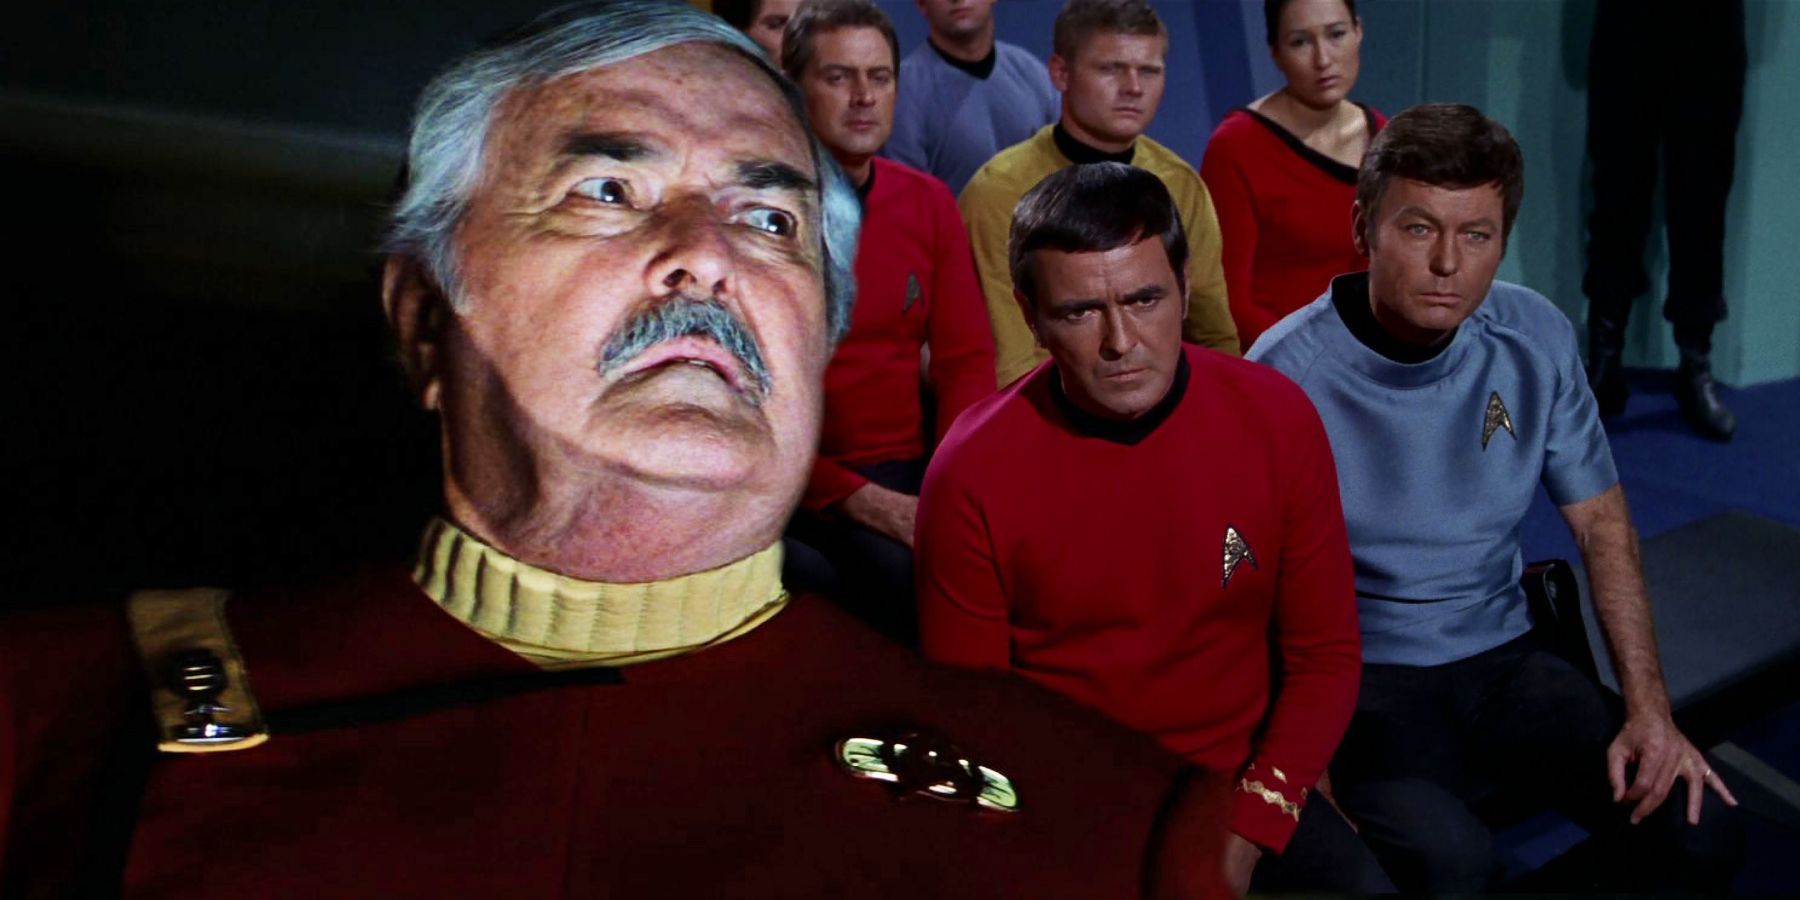 James Doohan as Scotty in Star Trek Generations and The Tholian Web